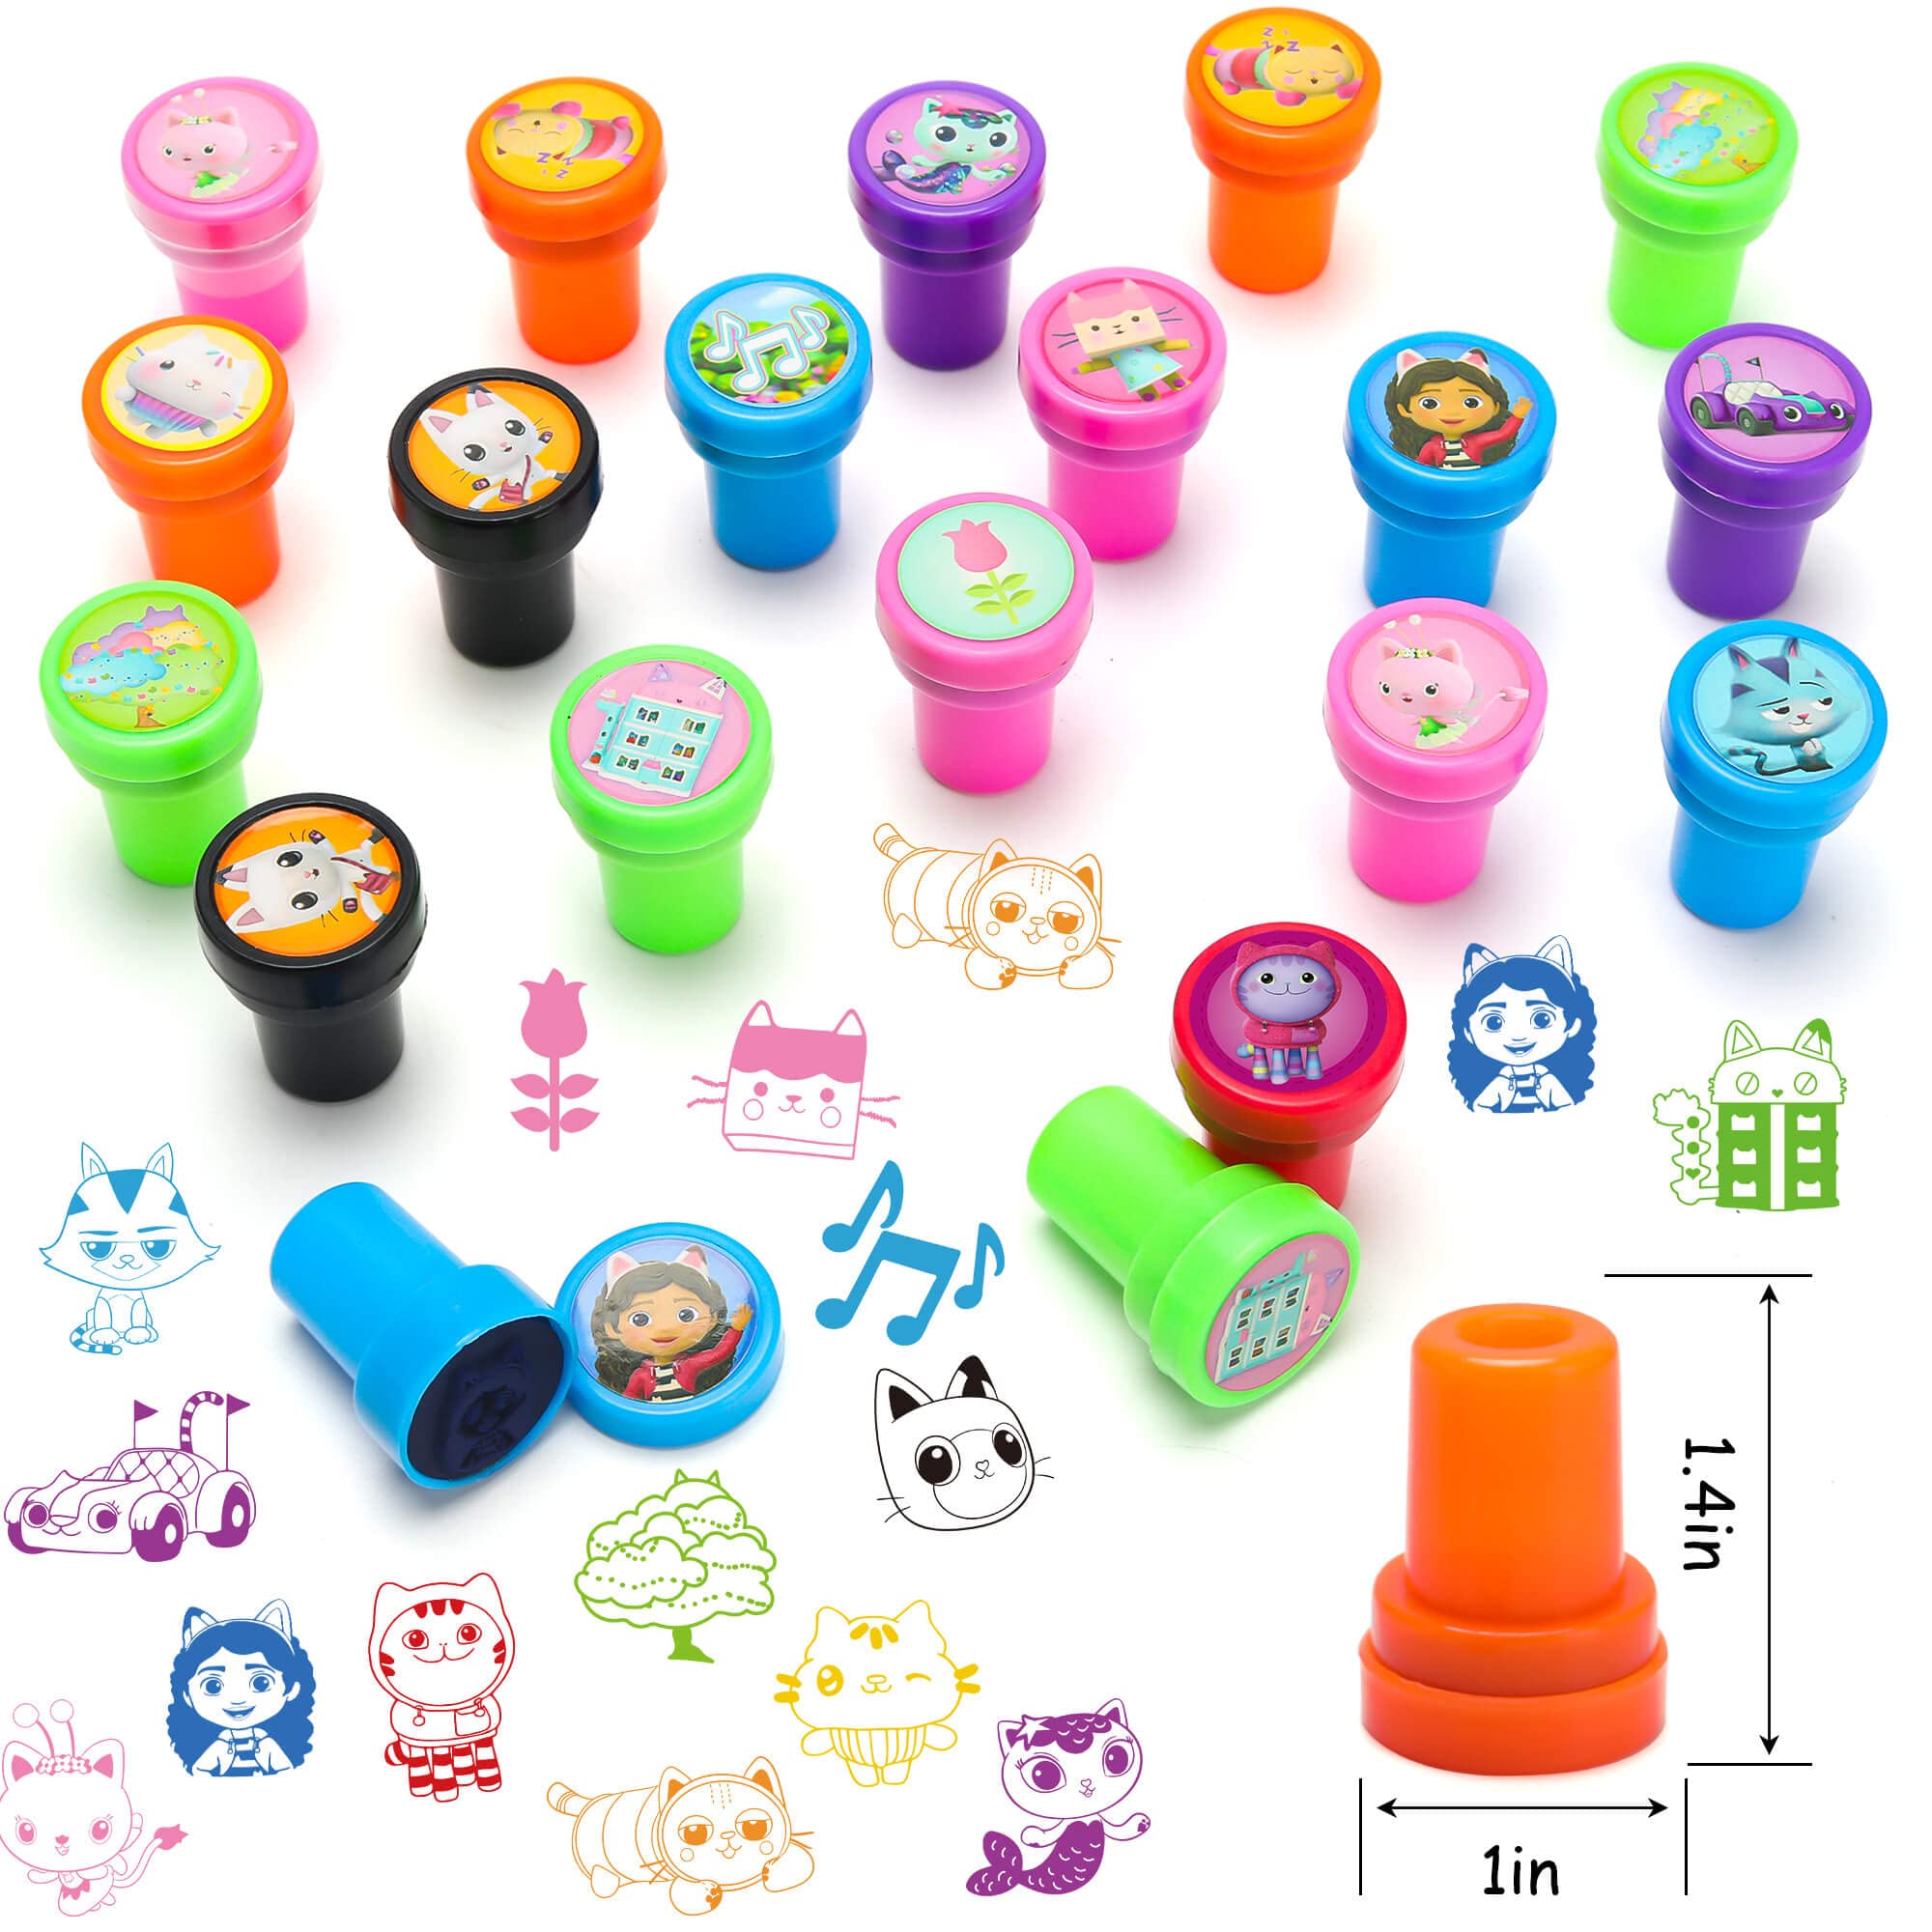 28Pcs Cute Cartoon Themed Stampers for Kids, Cartoon Birthday Party Supplies Favors, Goody Bag Treat Bag Stuff for Classroom Rewards Prizes, Cute Cartoon Party decorations, Kids Birthday Party Gifts